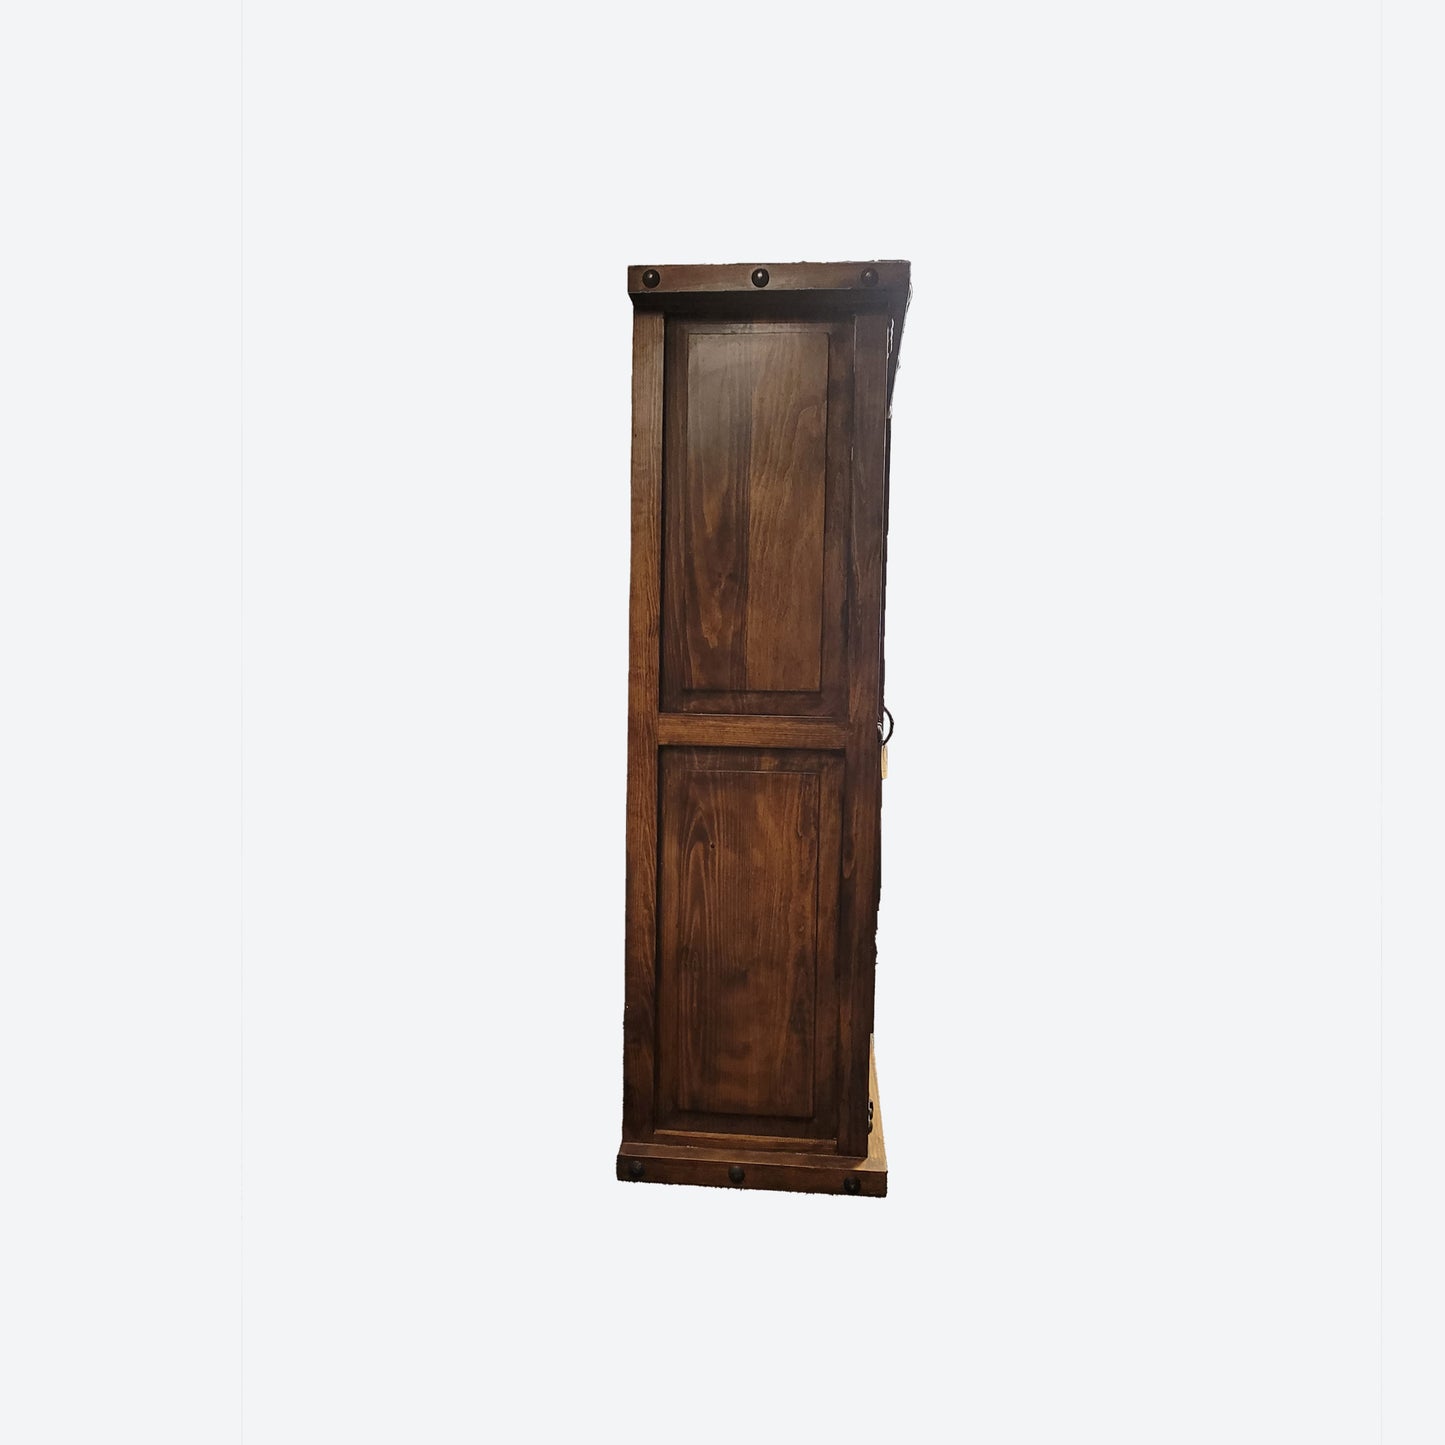 BROWN Mesquite  WOOD CLOSET WITH HAMMERED ACCENTS- SK (SKU1009)